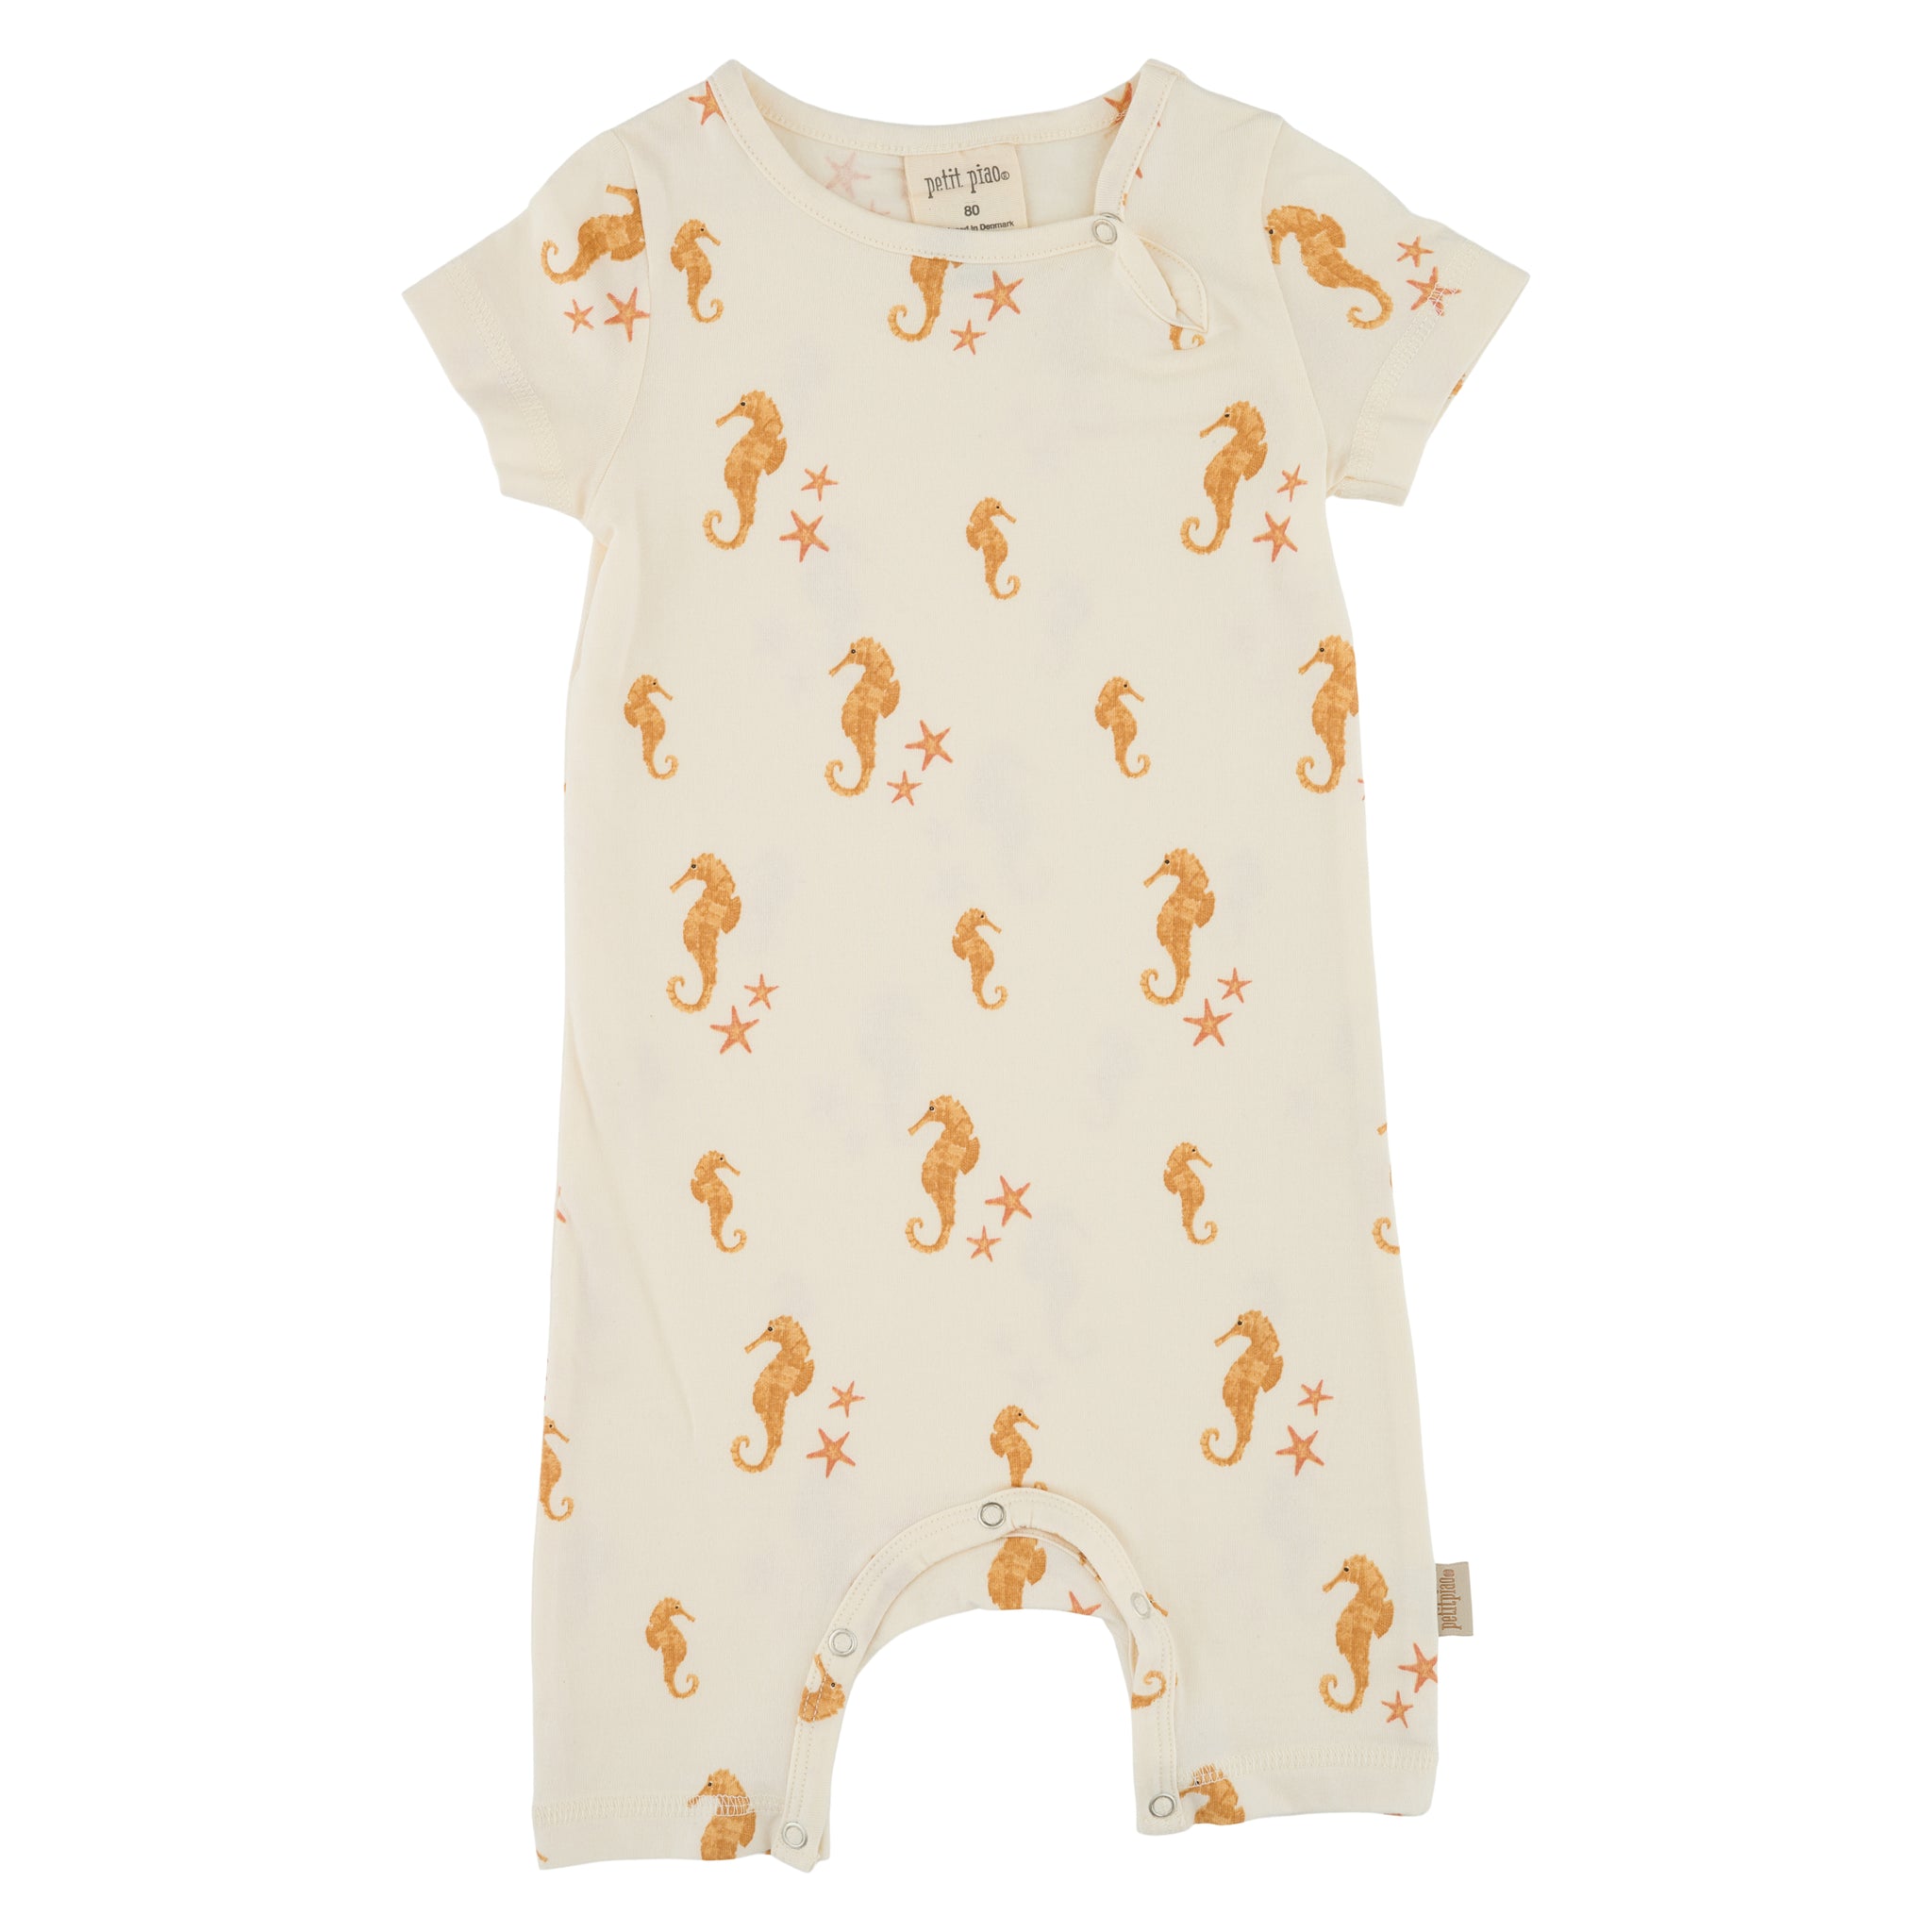 Petit Piao - Jumpsuit SS Printed - Seahorse